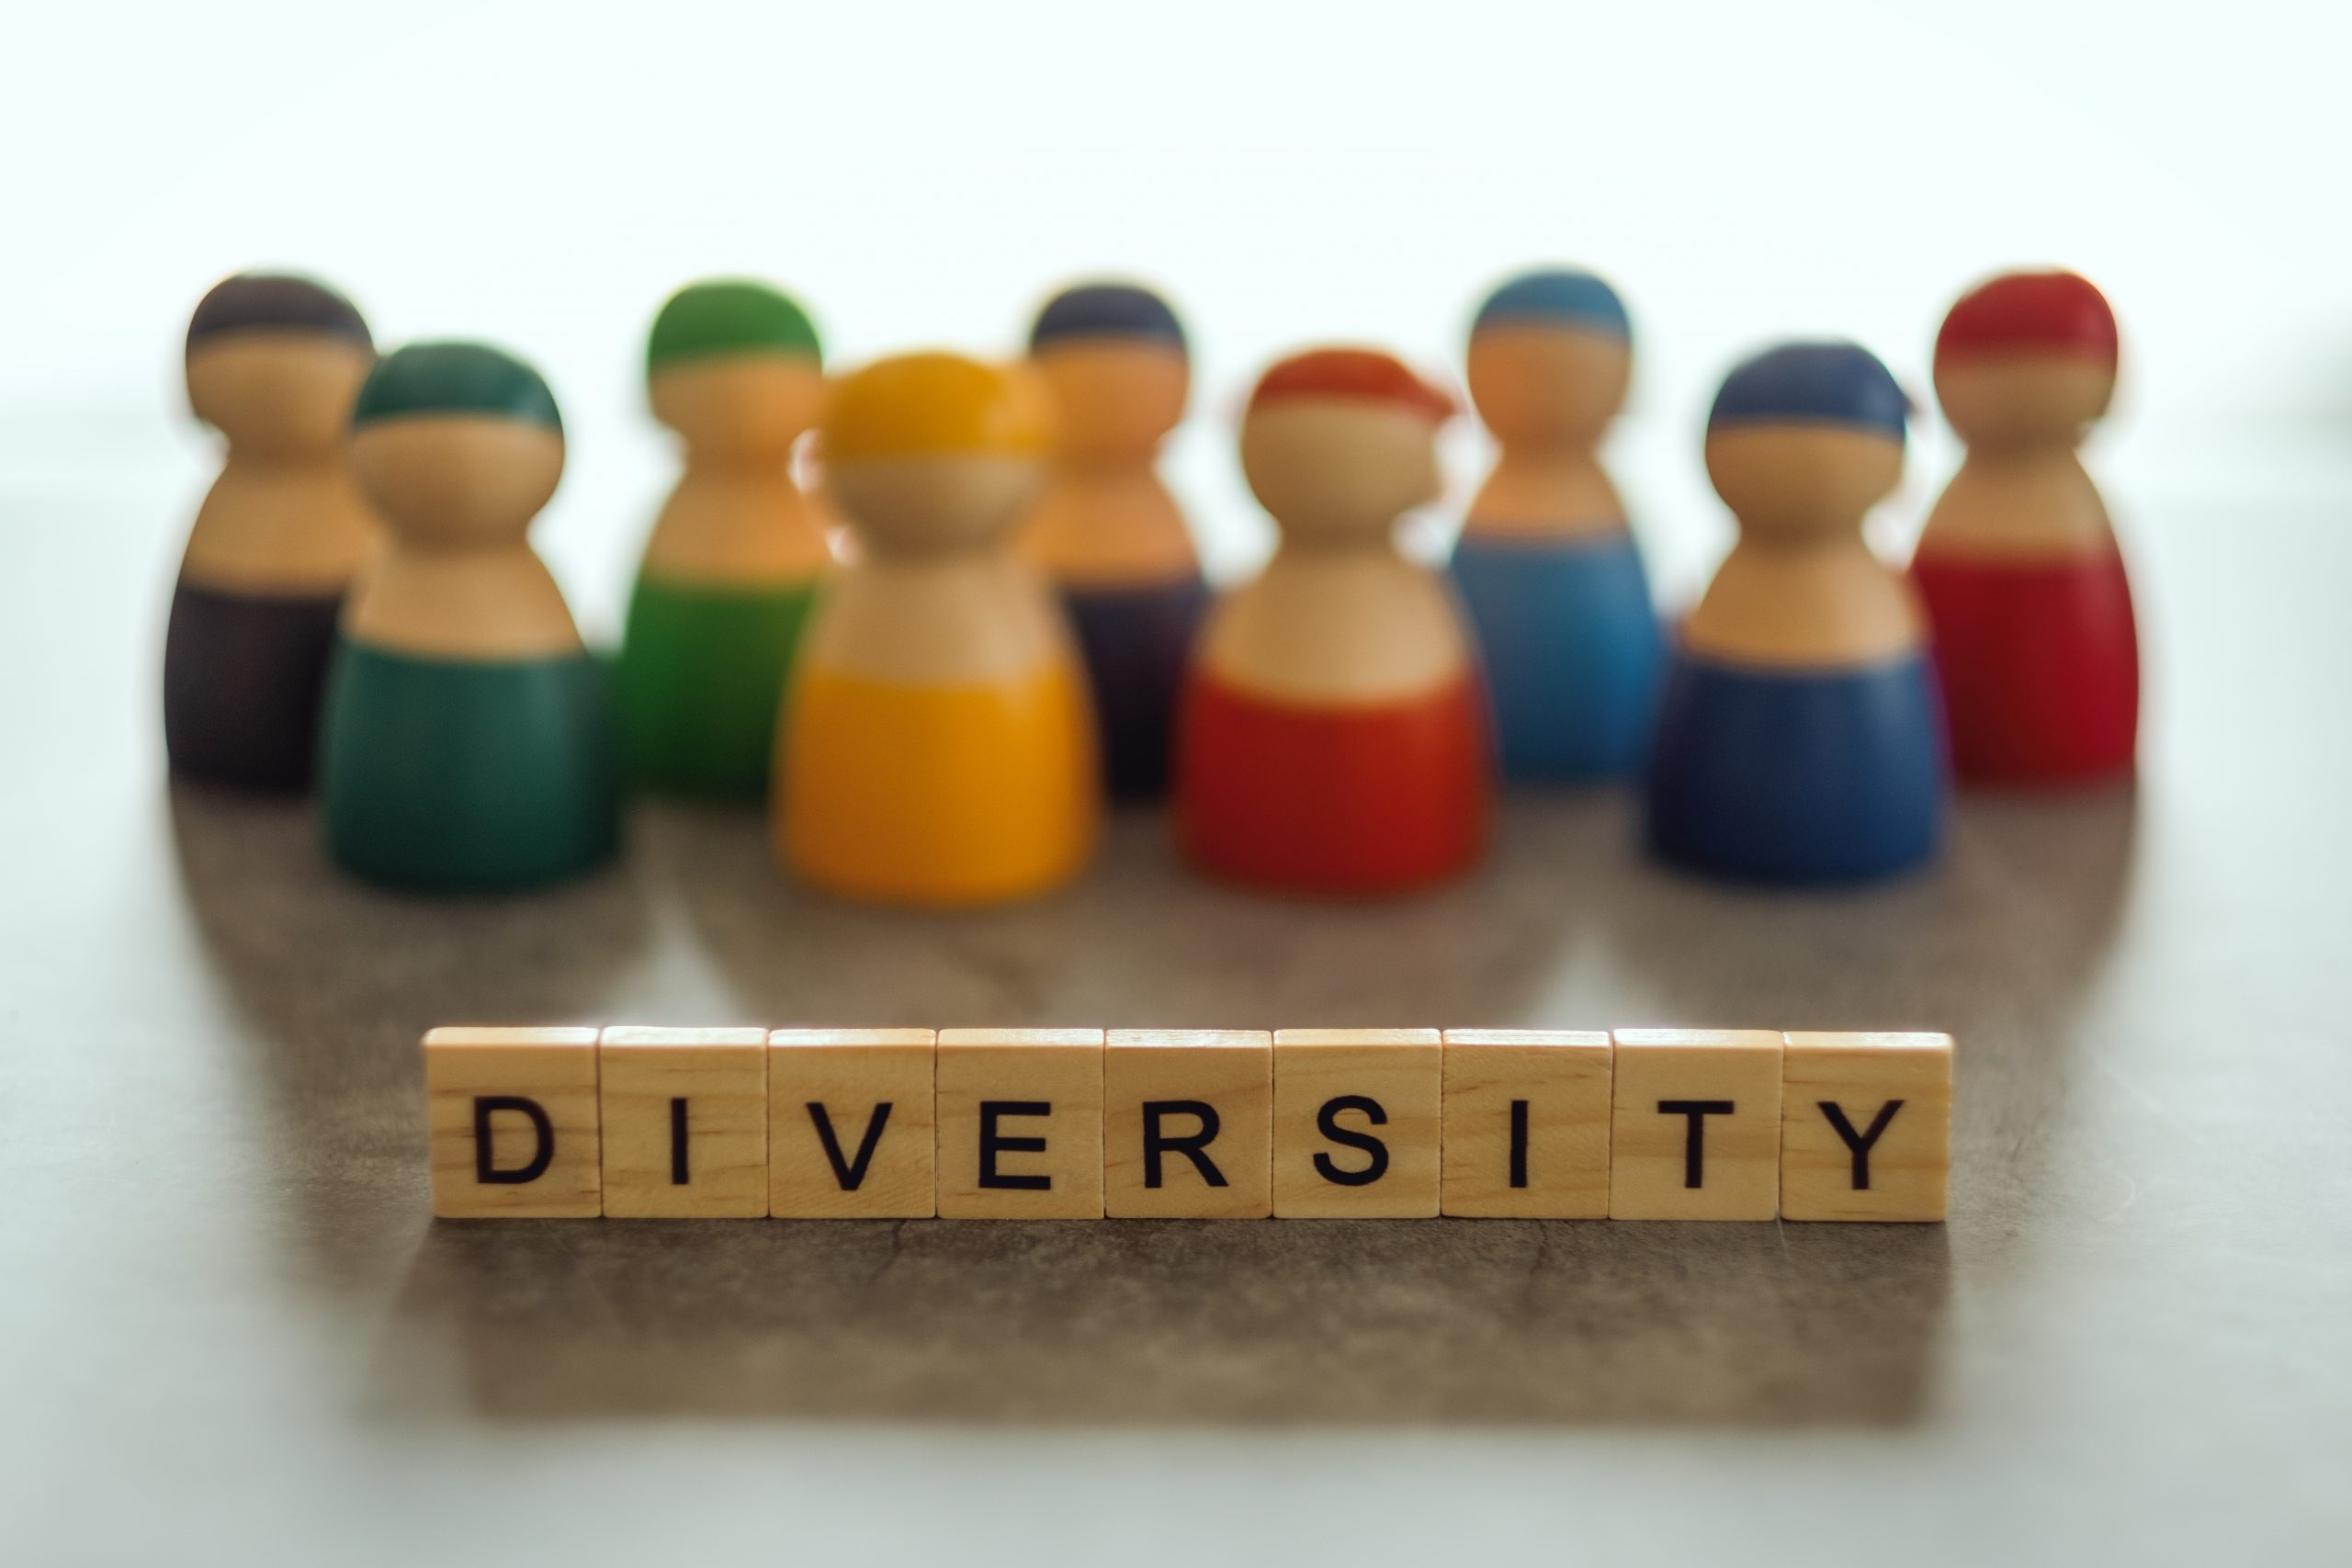 The evolution of diversity at the workplace